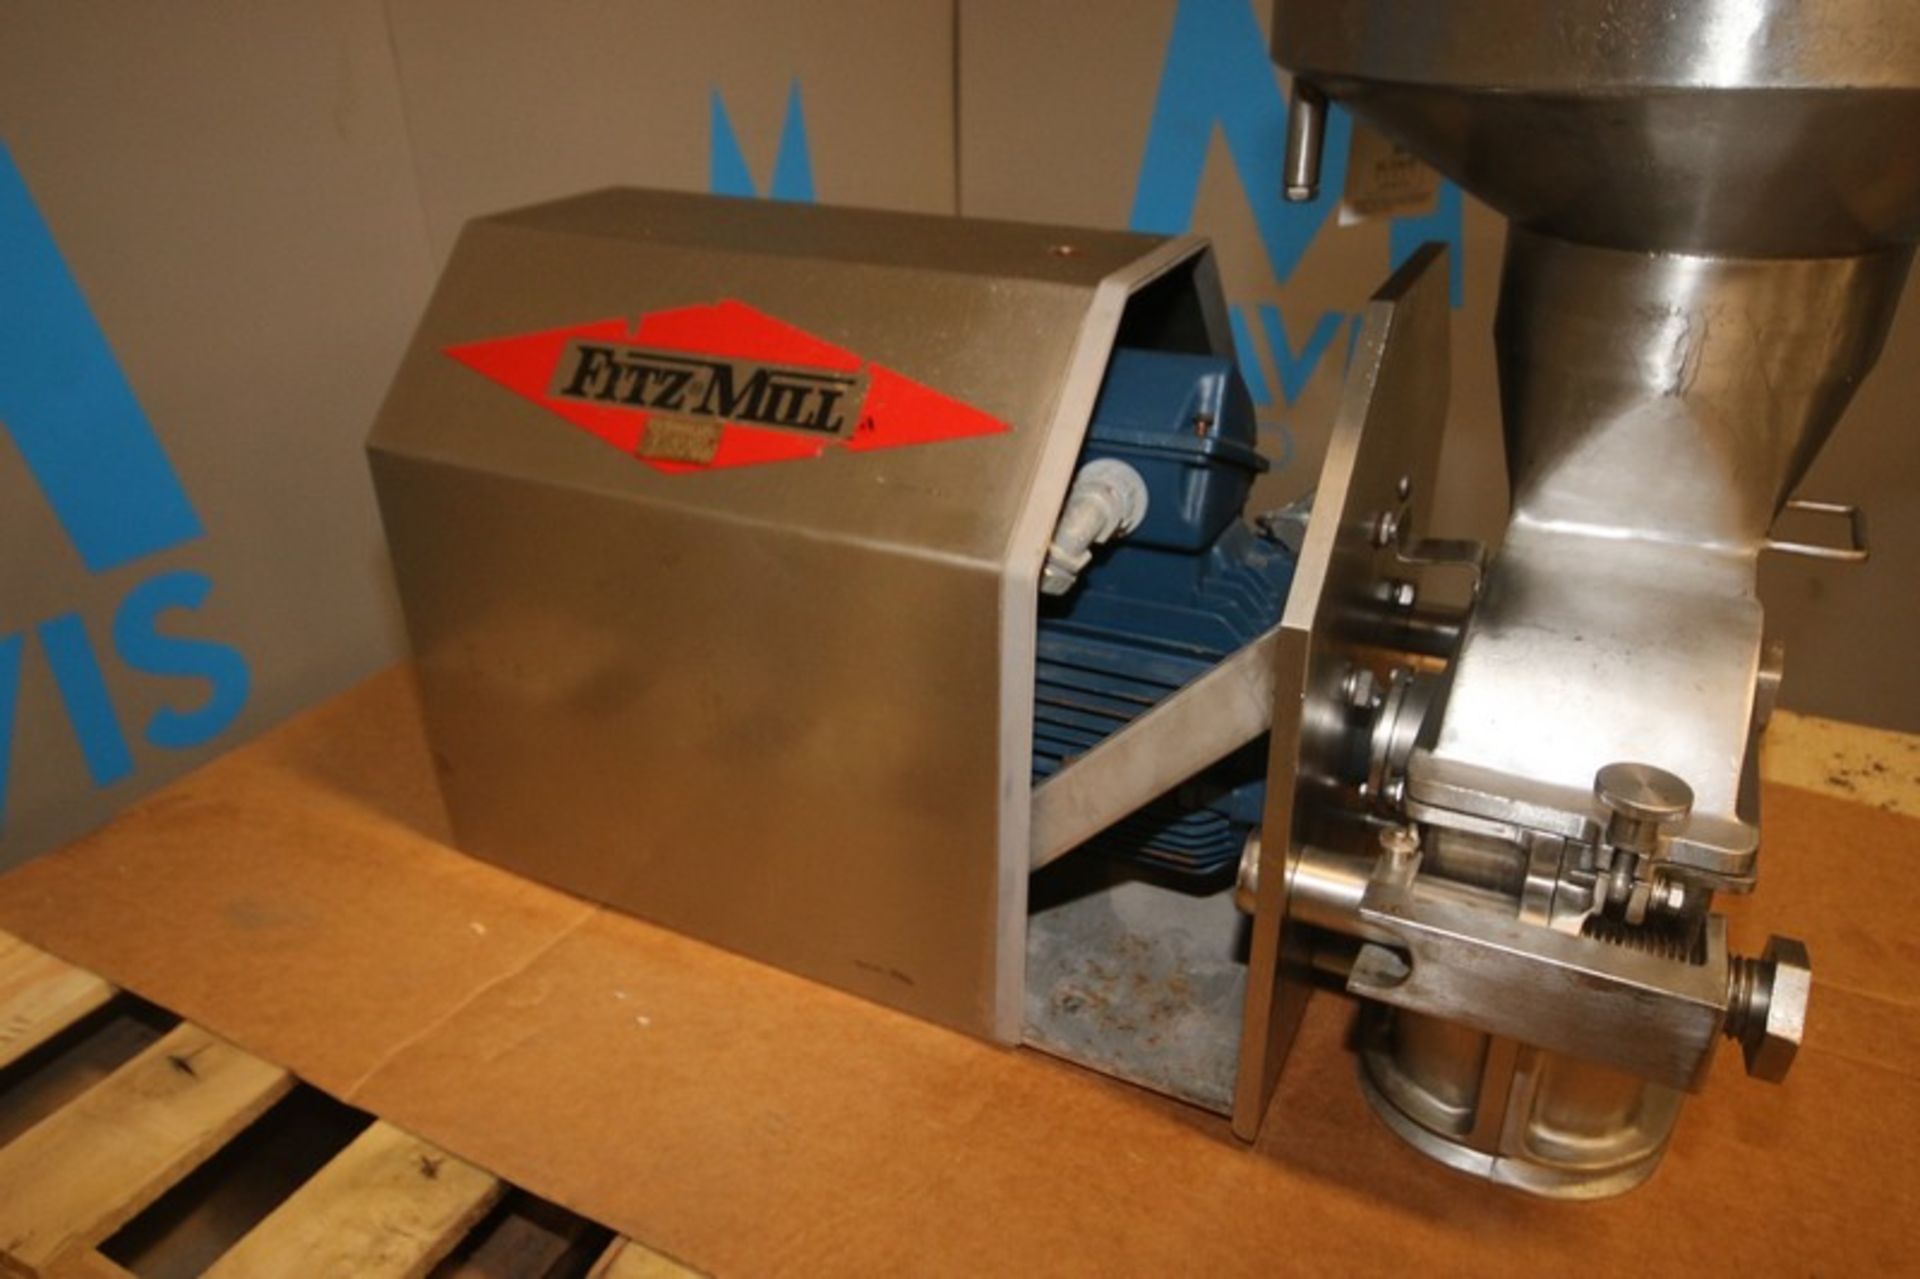 FitzMill S/S Mills,with Aprox. 16-1/2" Dia. S/S Infeed Funnel, with Deitz 3 hp Motor, 230/460 Volts, - Image 8 of 9